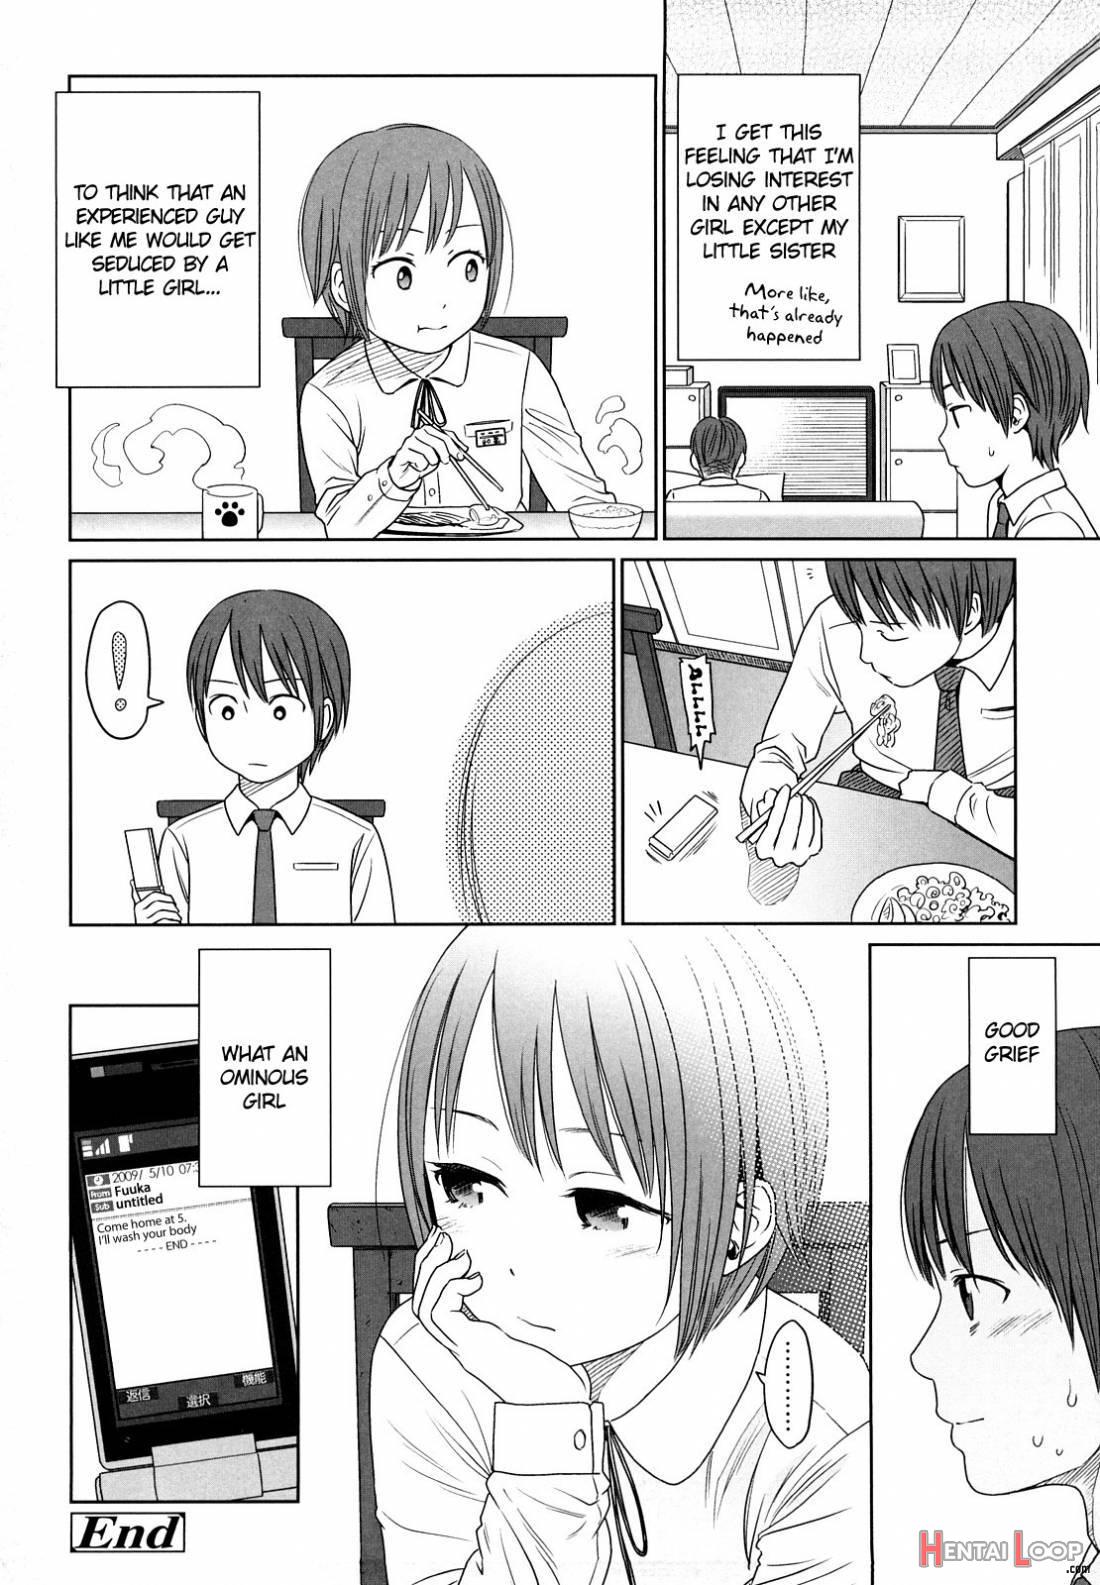 Japanese Preteen Suite page 115